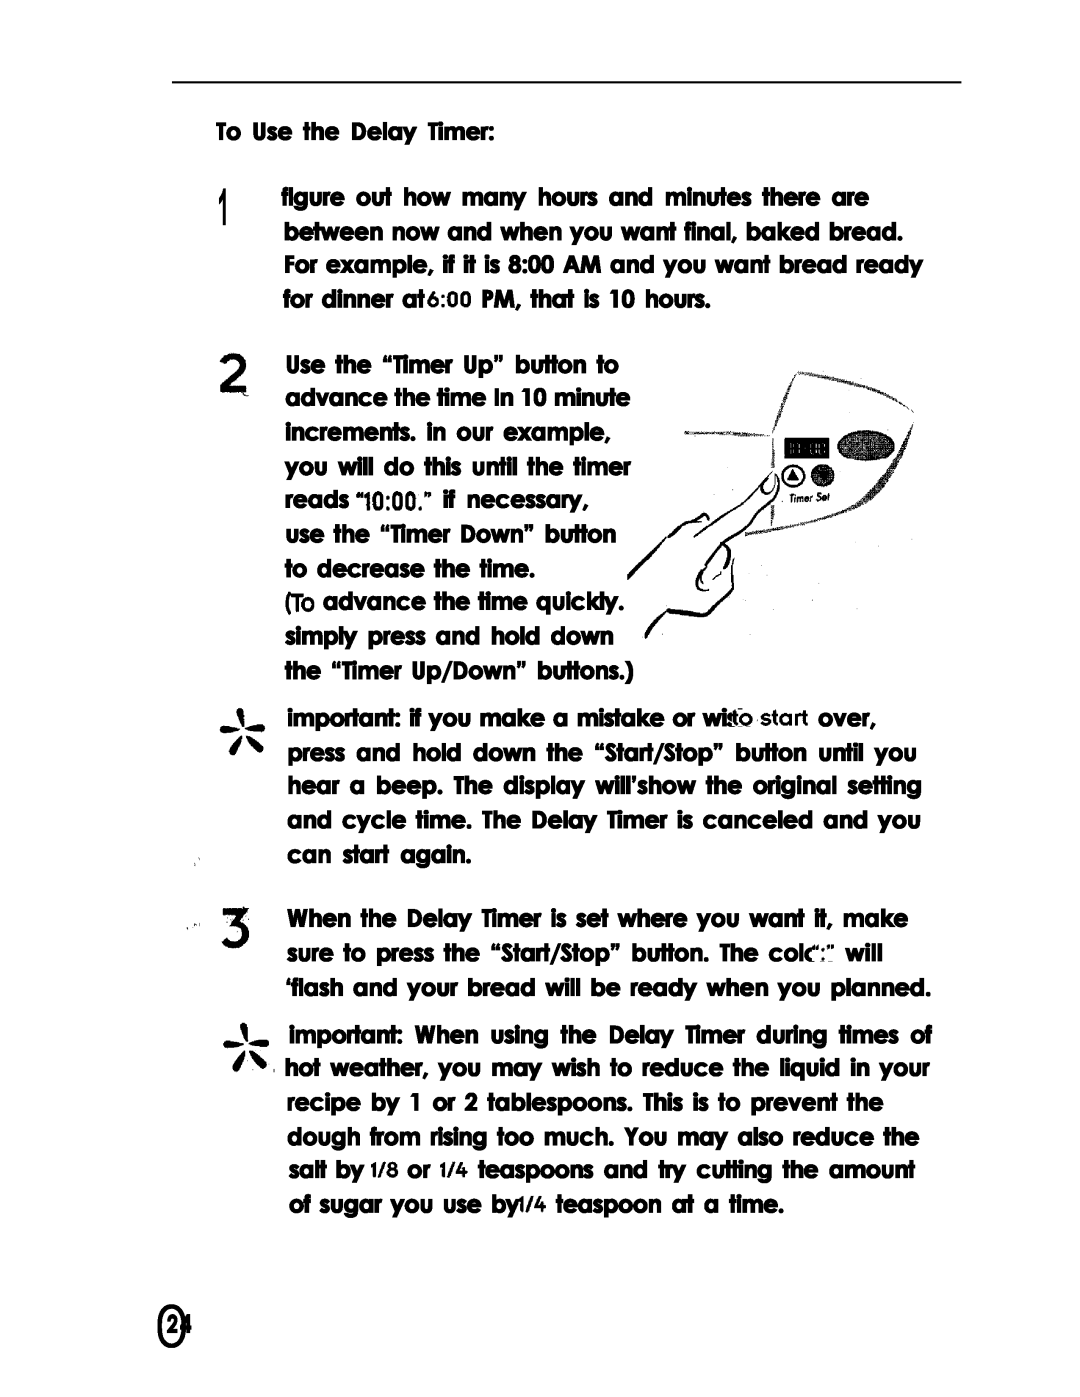 Oster Bread Maker user manual To Use the Delay Timer, for dinner at PM, that is 10 hours 